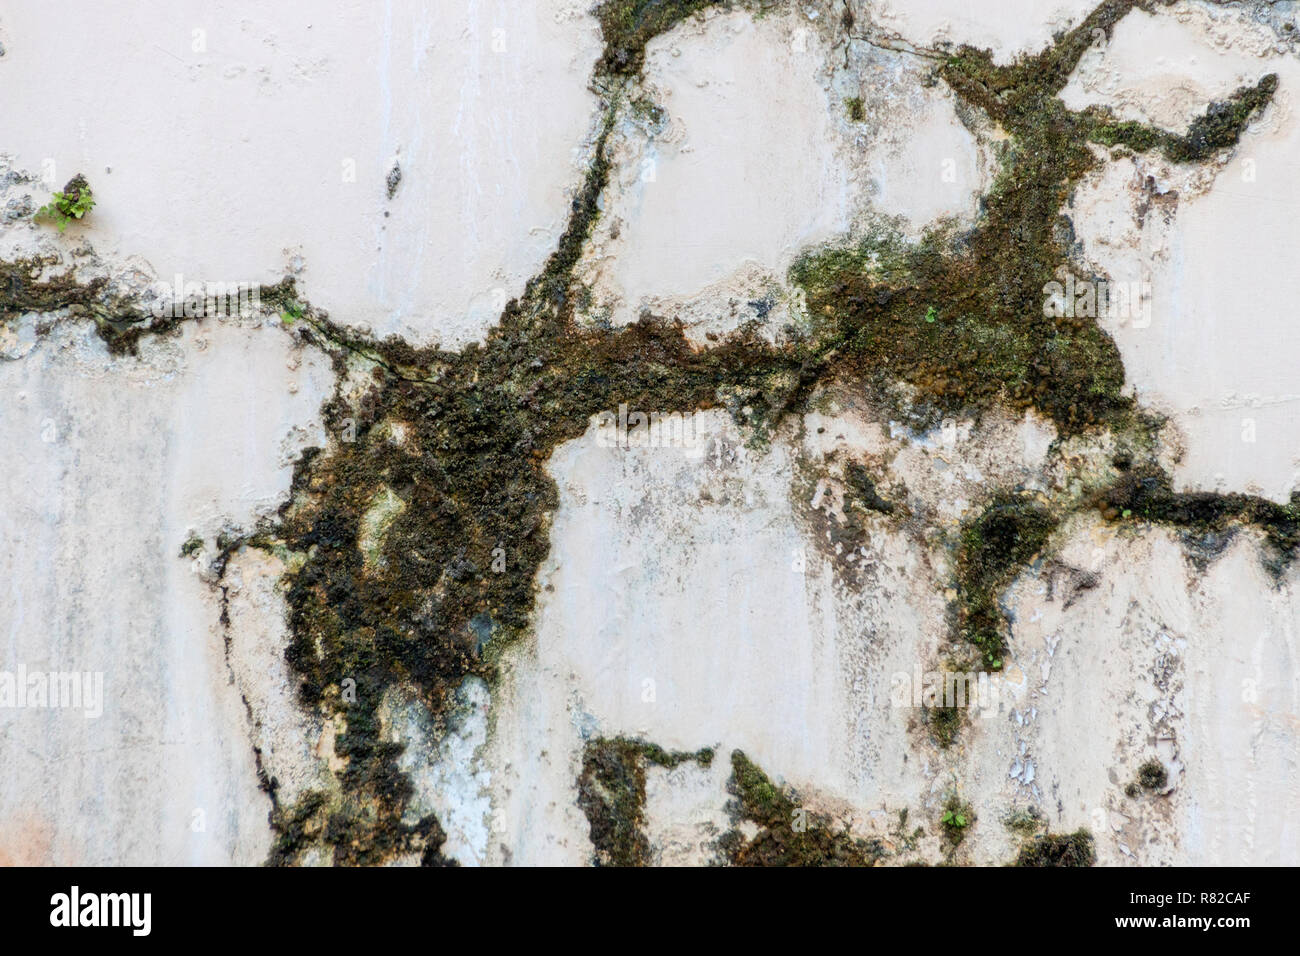 A close up view of green and drown moss growing though cracks on the side of a white wall Stock Photo